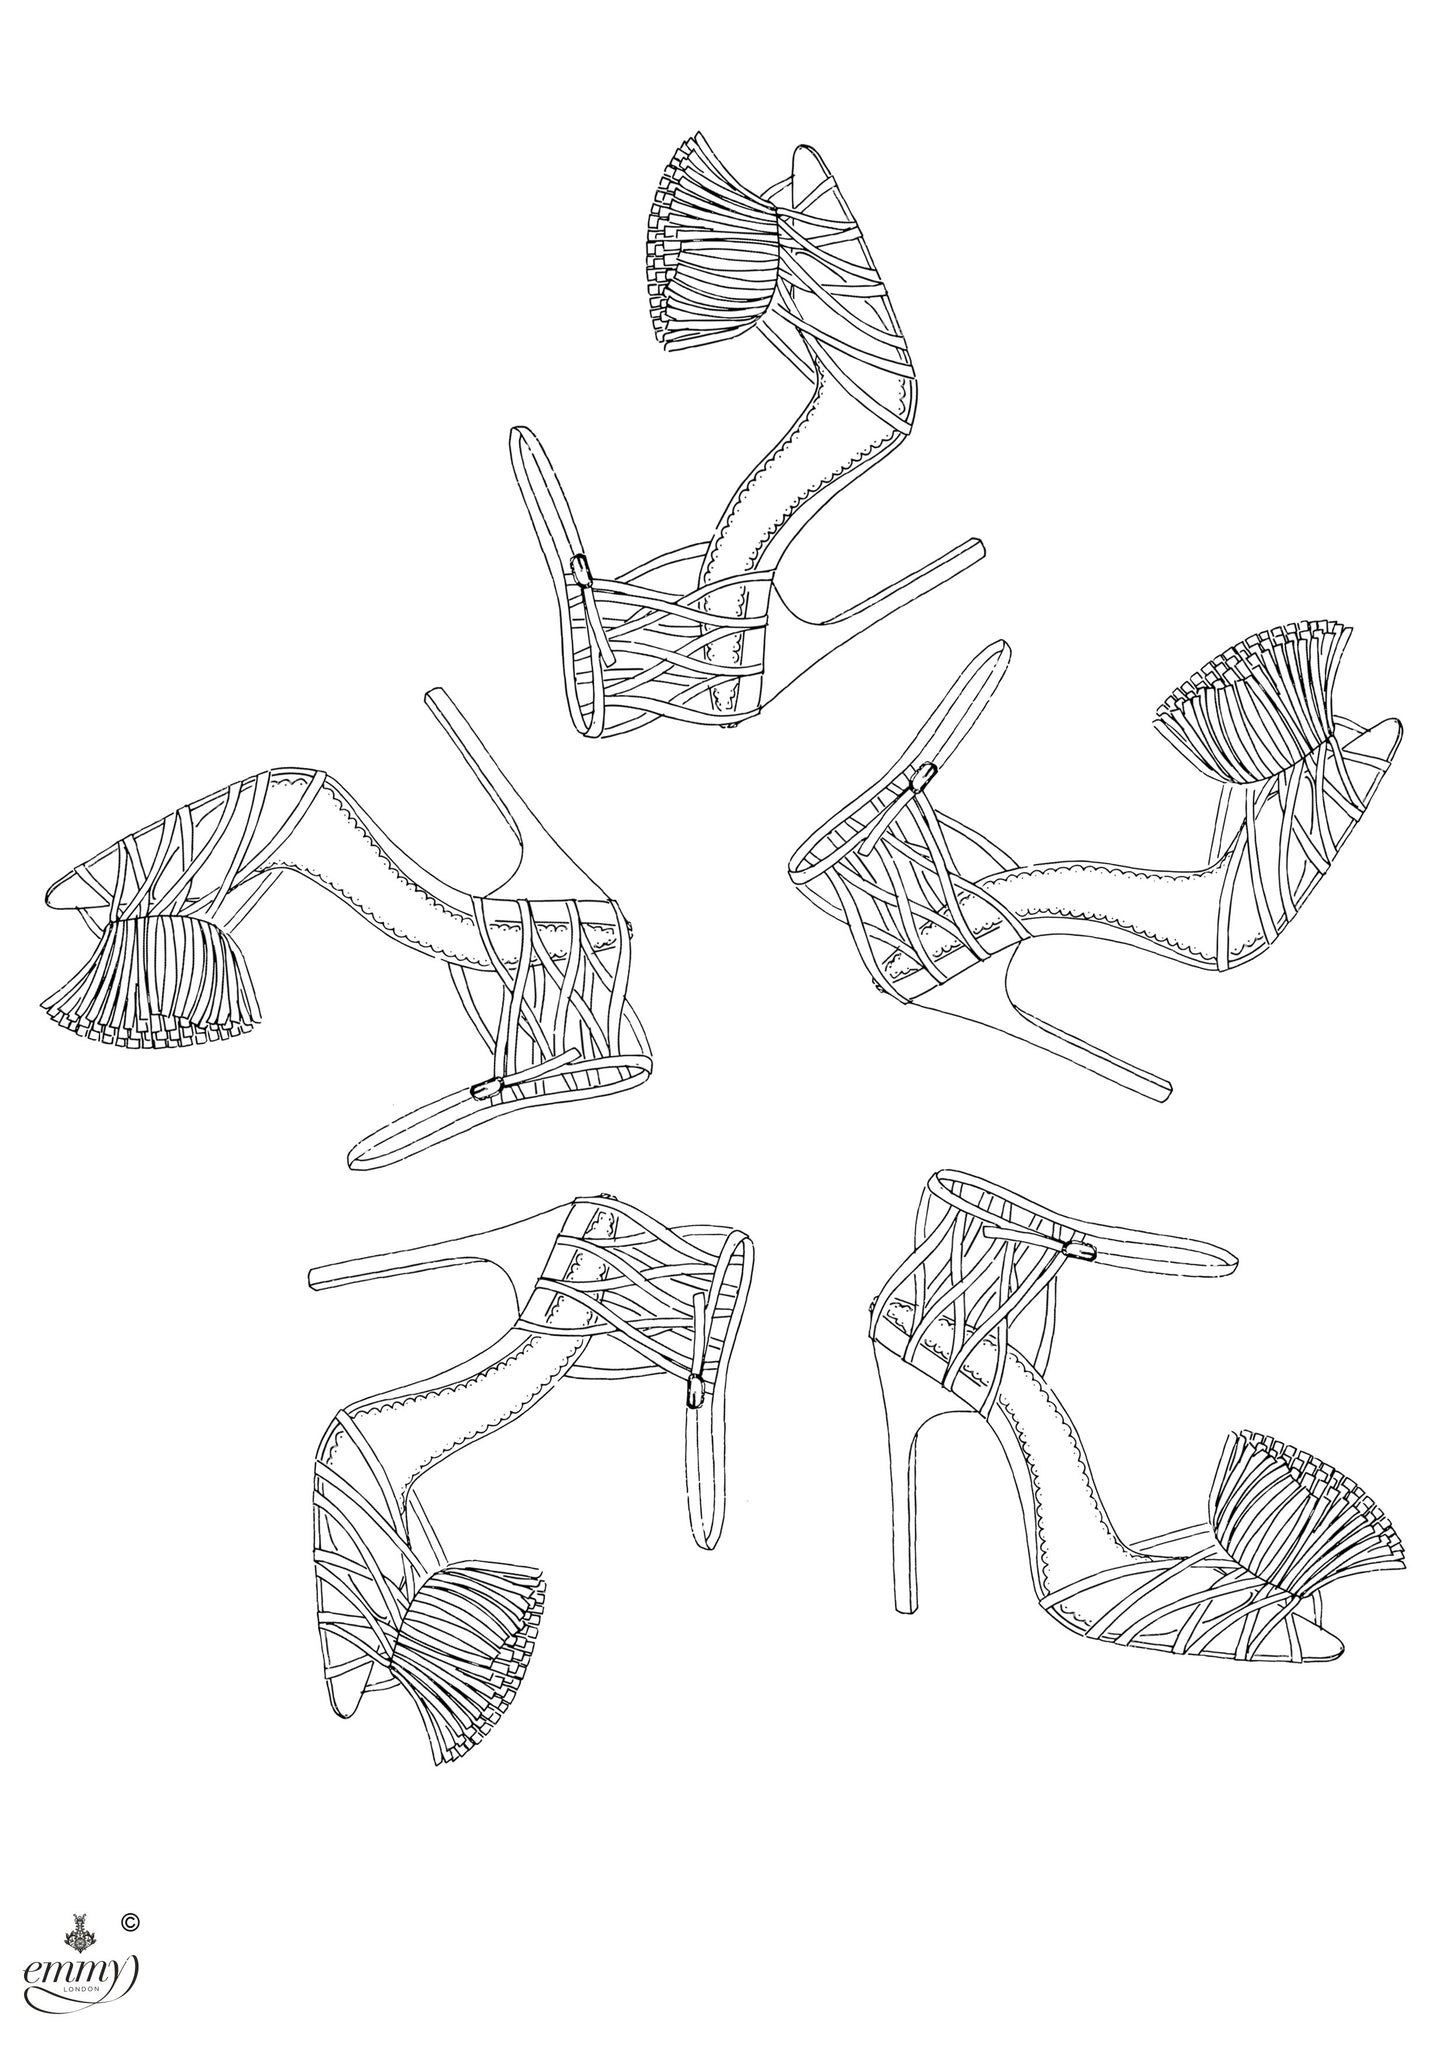 Emmy London Sandals Colouring Page